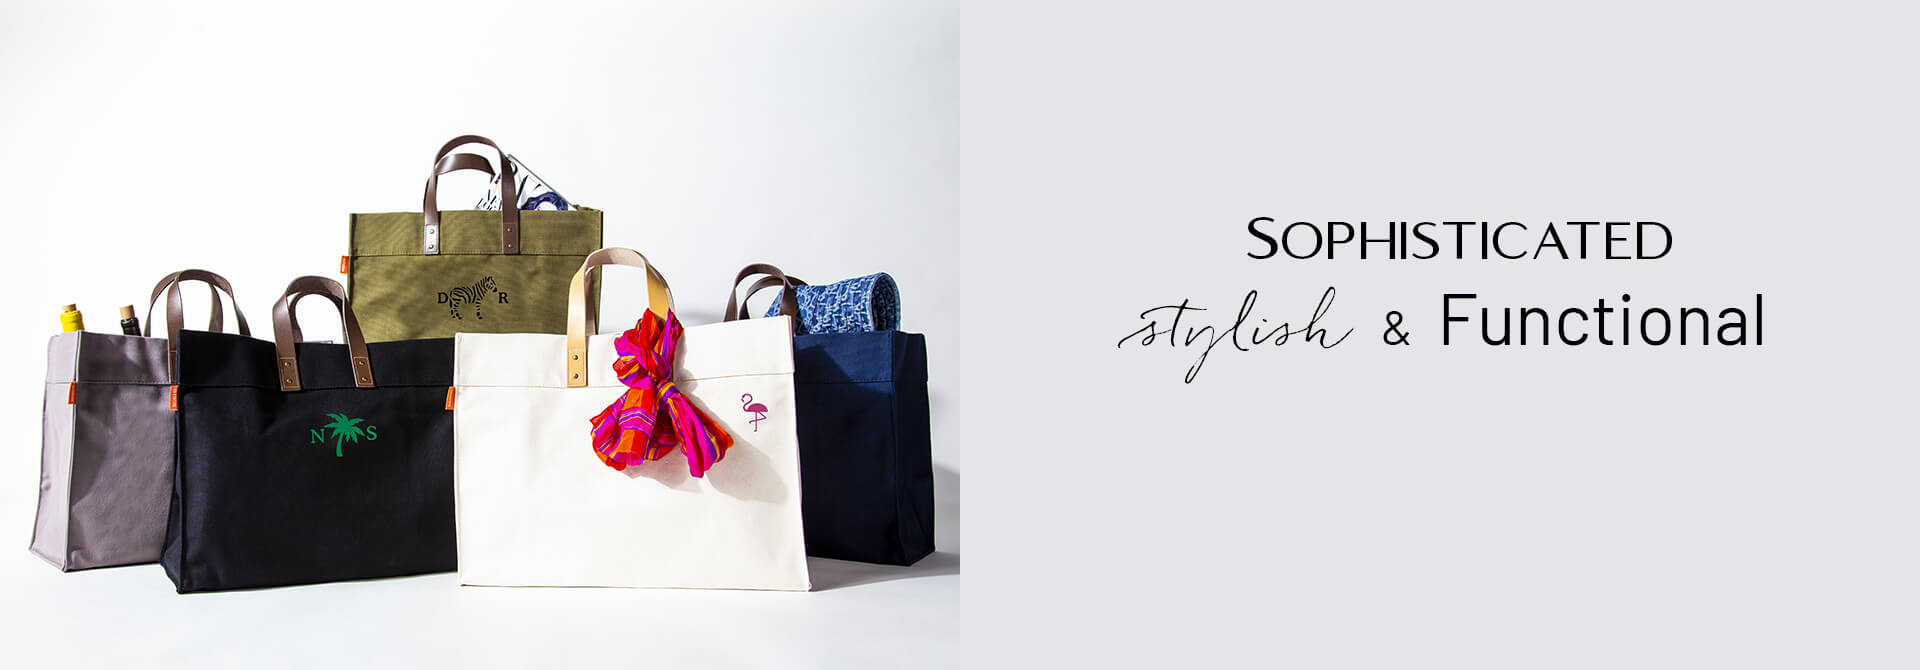 CBStation | Wholesale Canvas Totes, Travel Bags, Home Goods & More